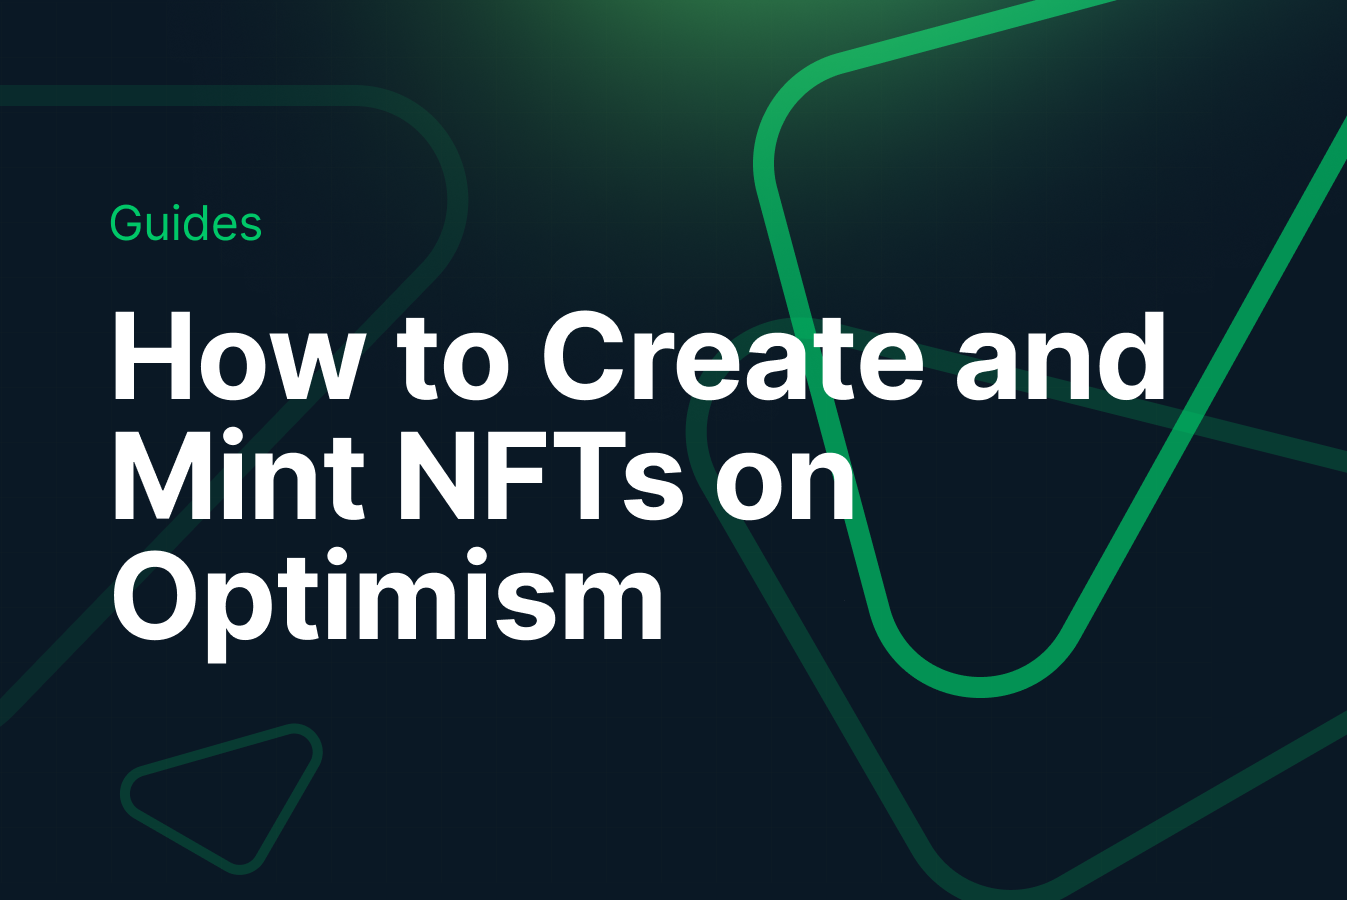 How to Create and Mint NFTs on Optimism